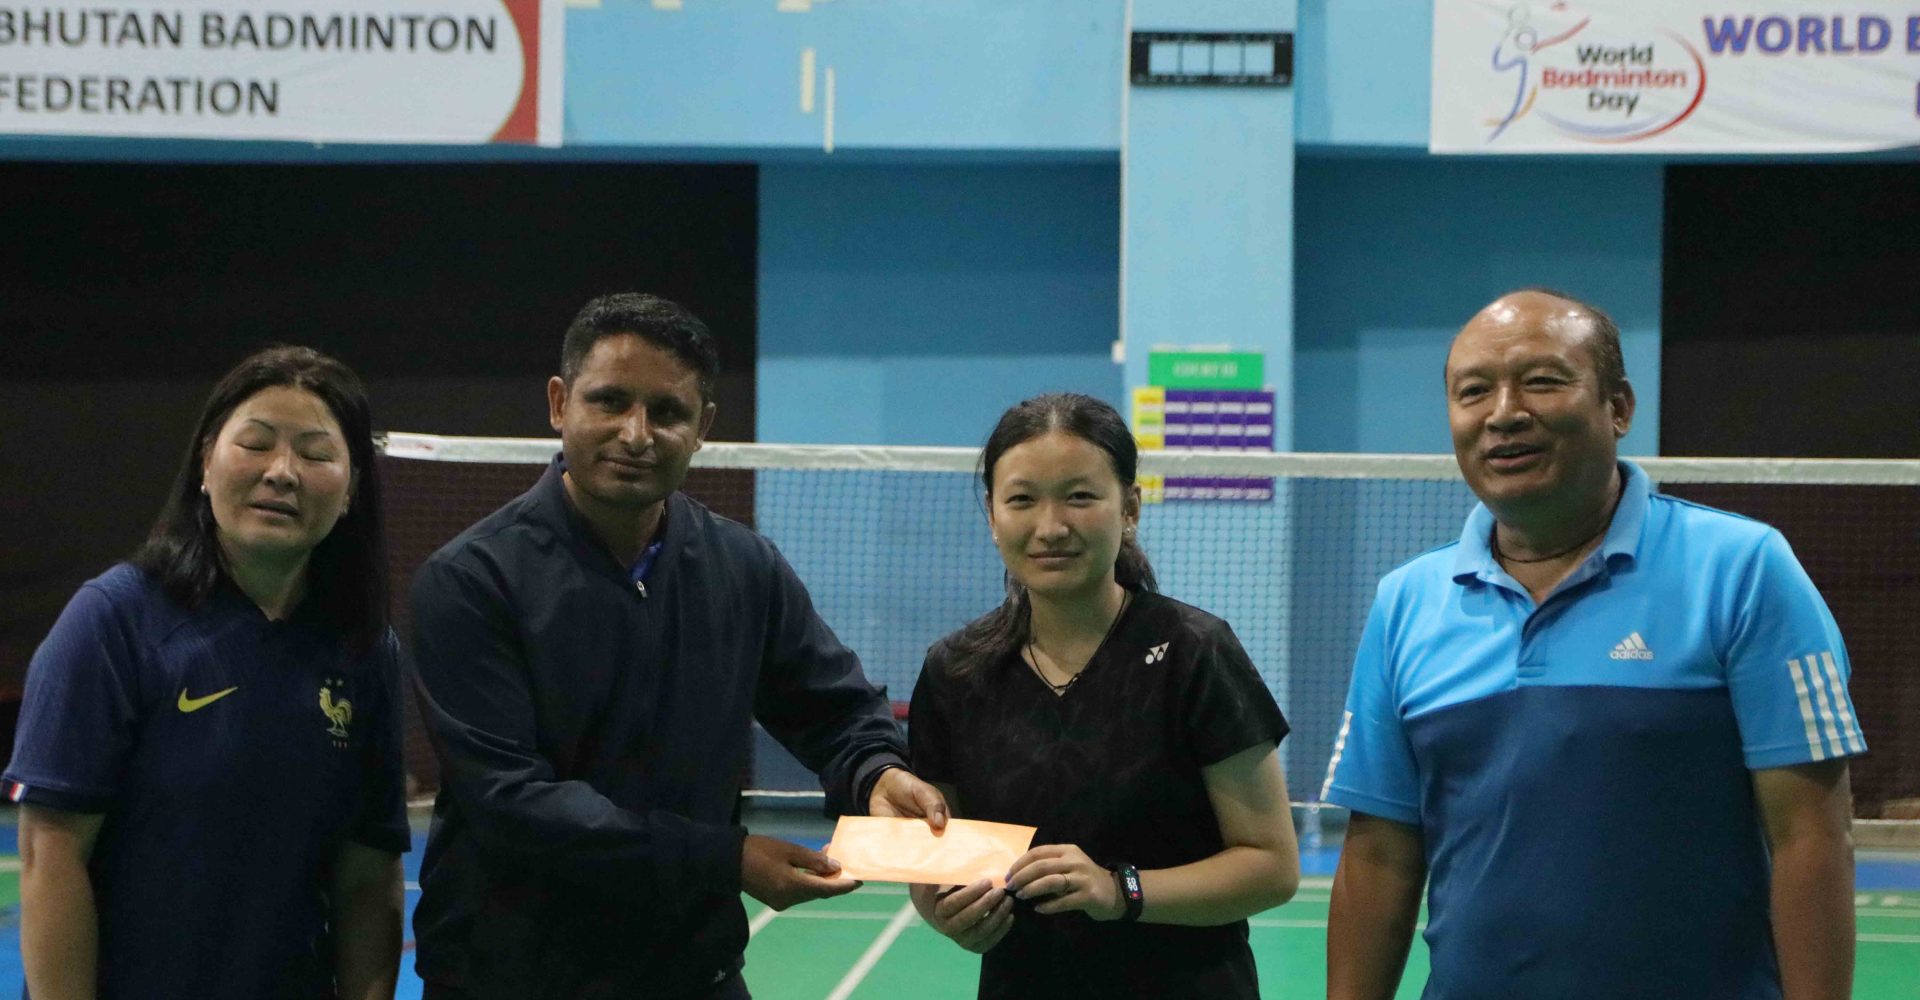 Community Comes Together for Successful Badminton Tournament